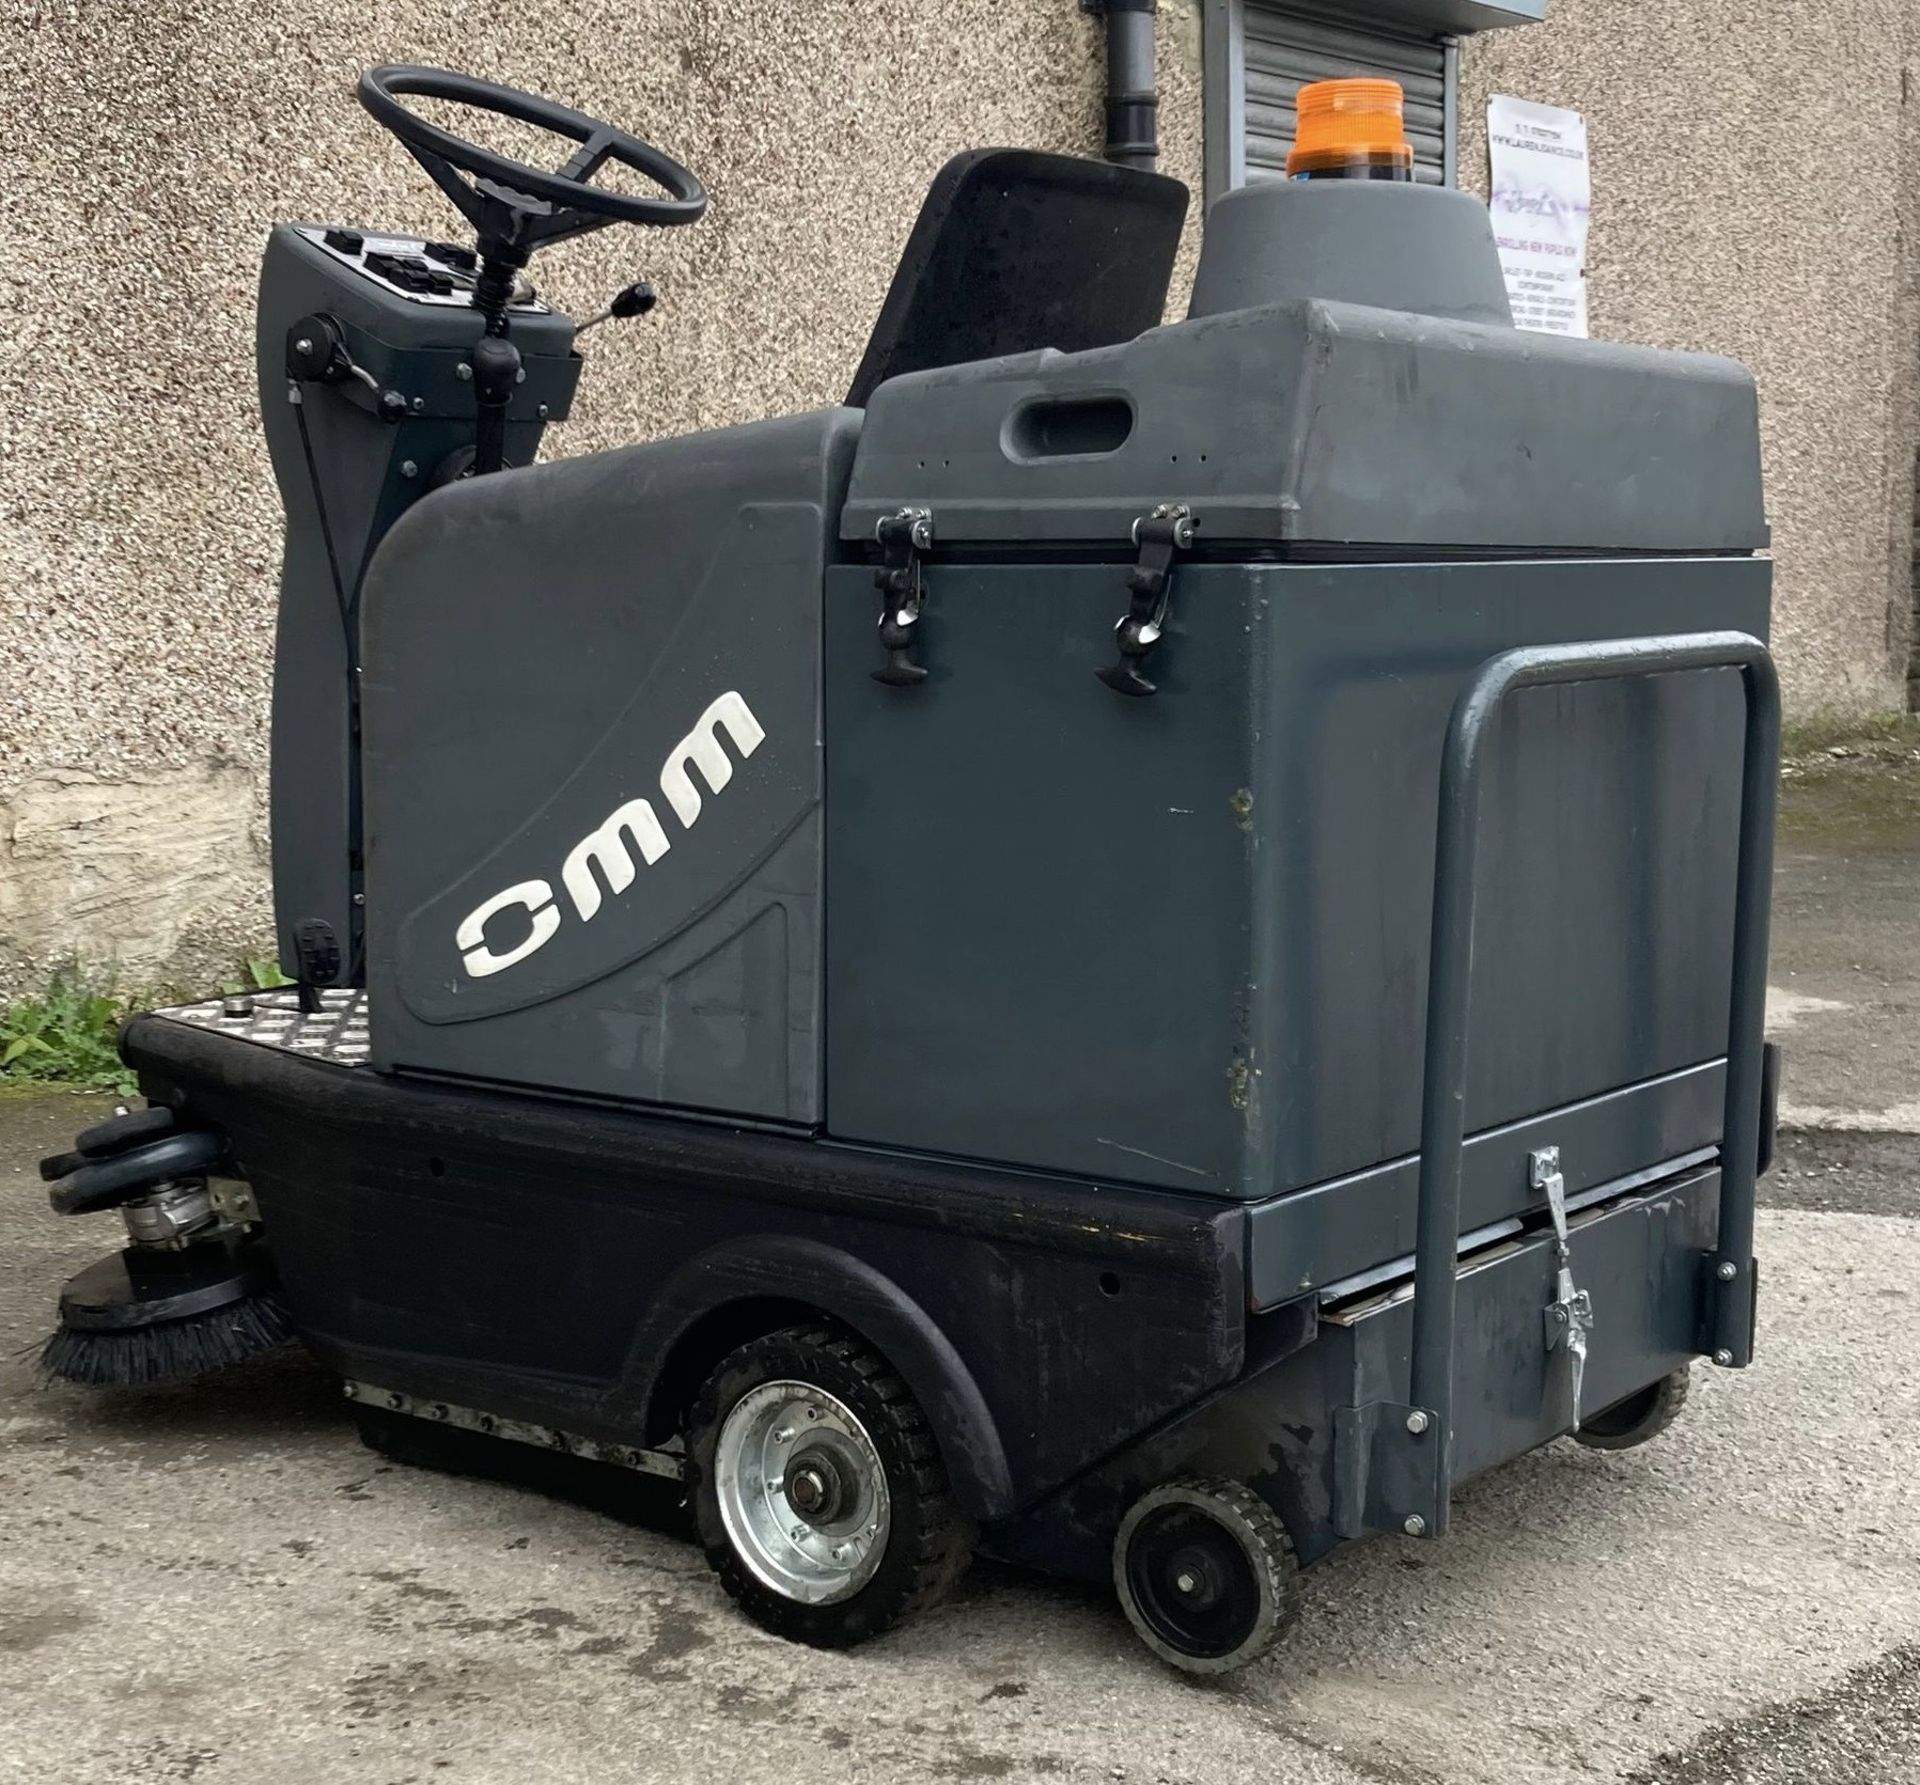 OMM Ciclope 70B ride on electric Sweeper, year 201 - Image 4 of 16